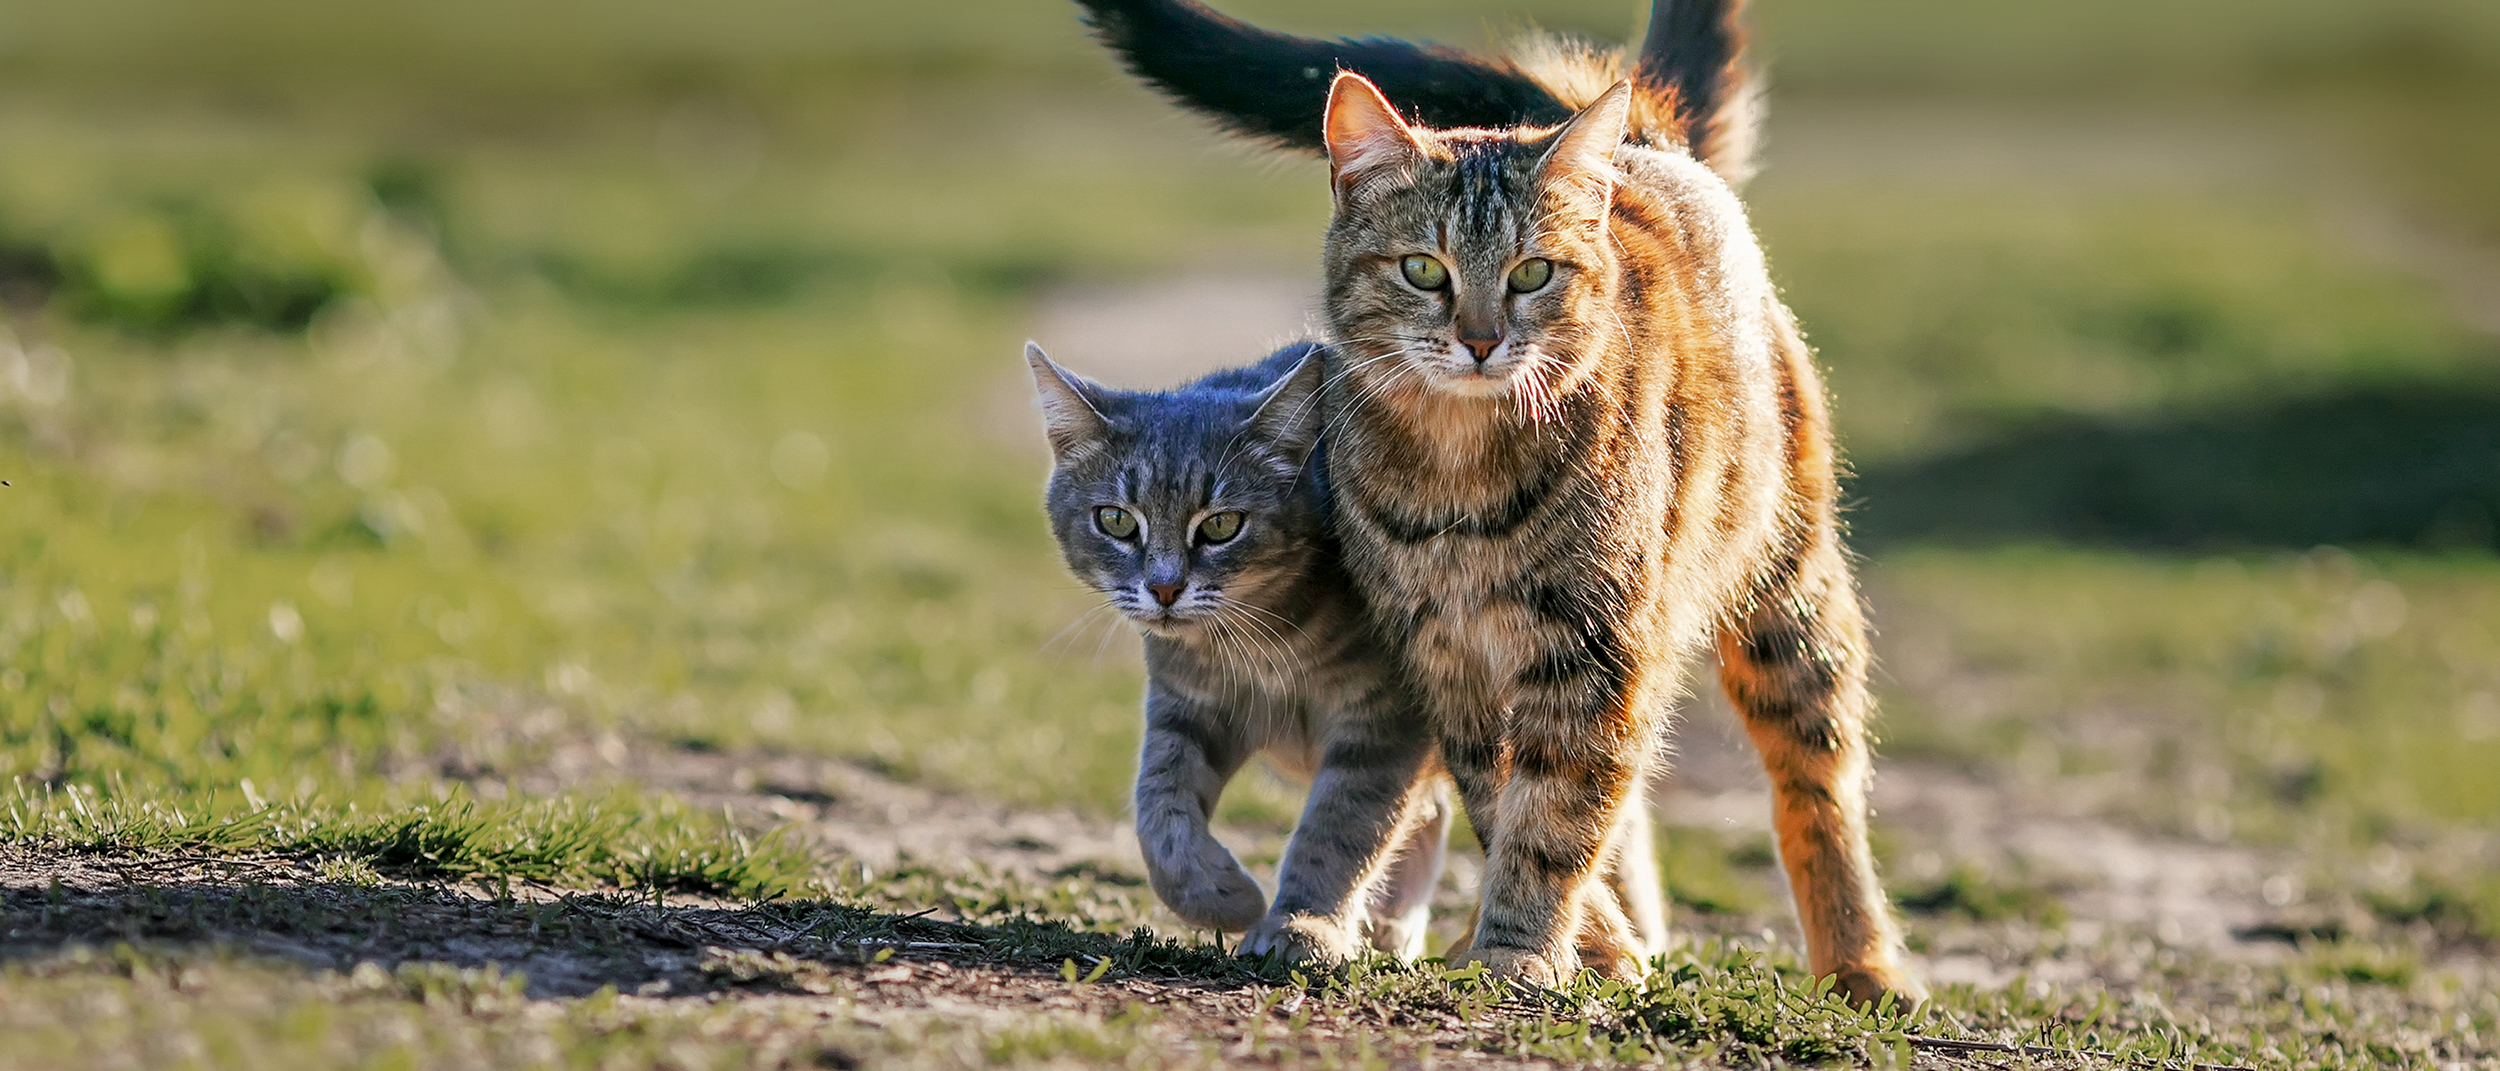 Two adult cats walking together in a field.